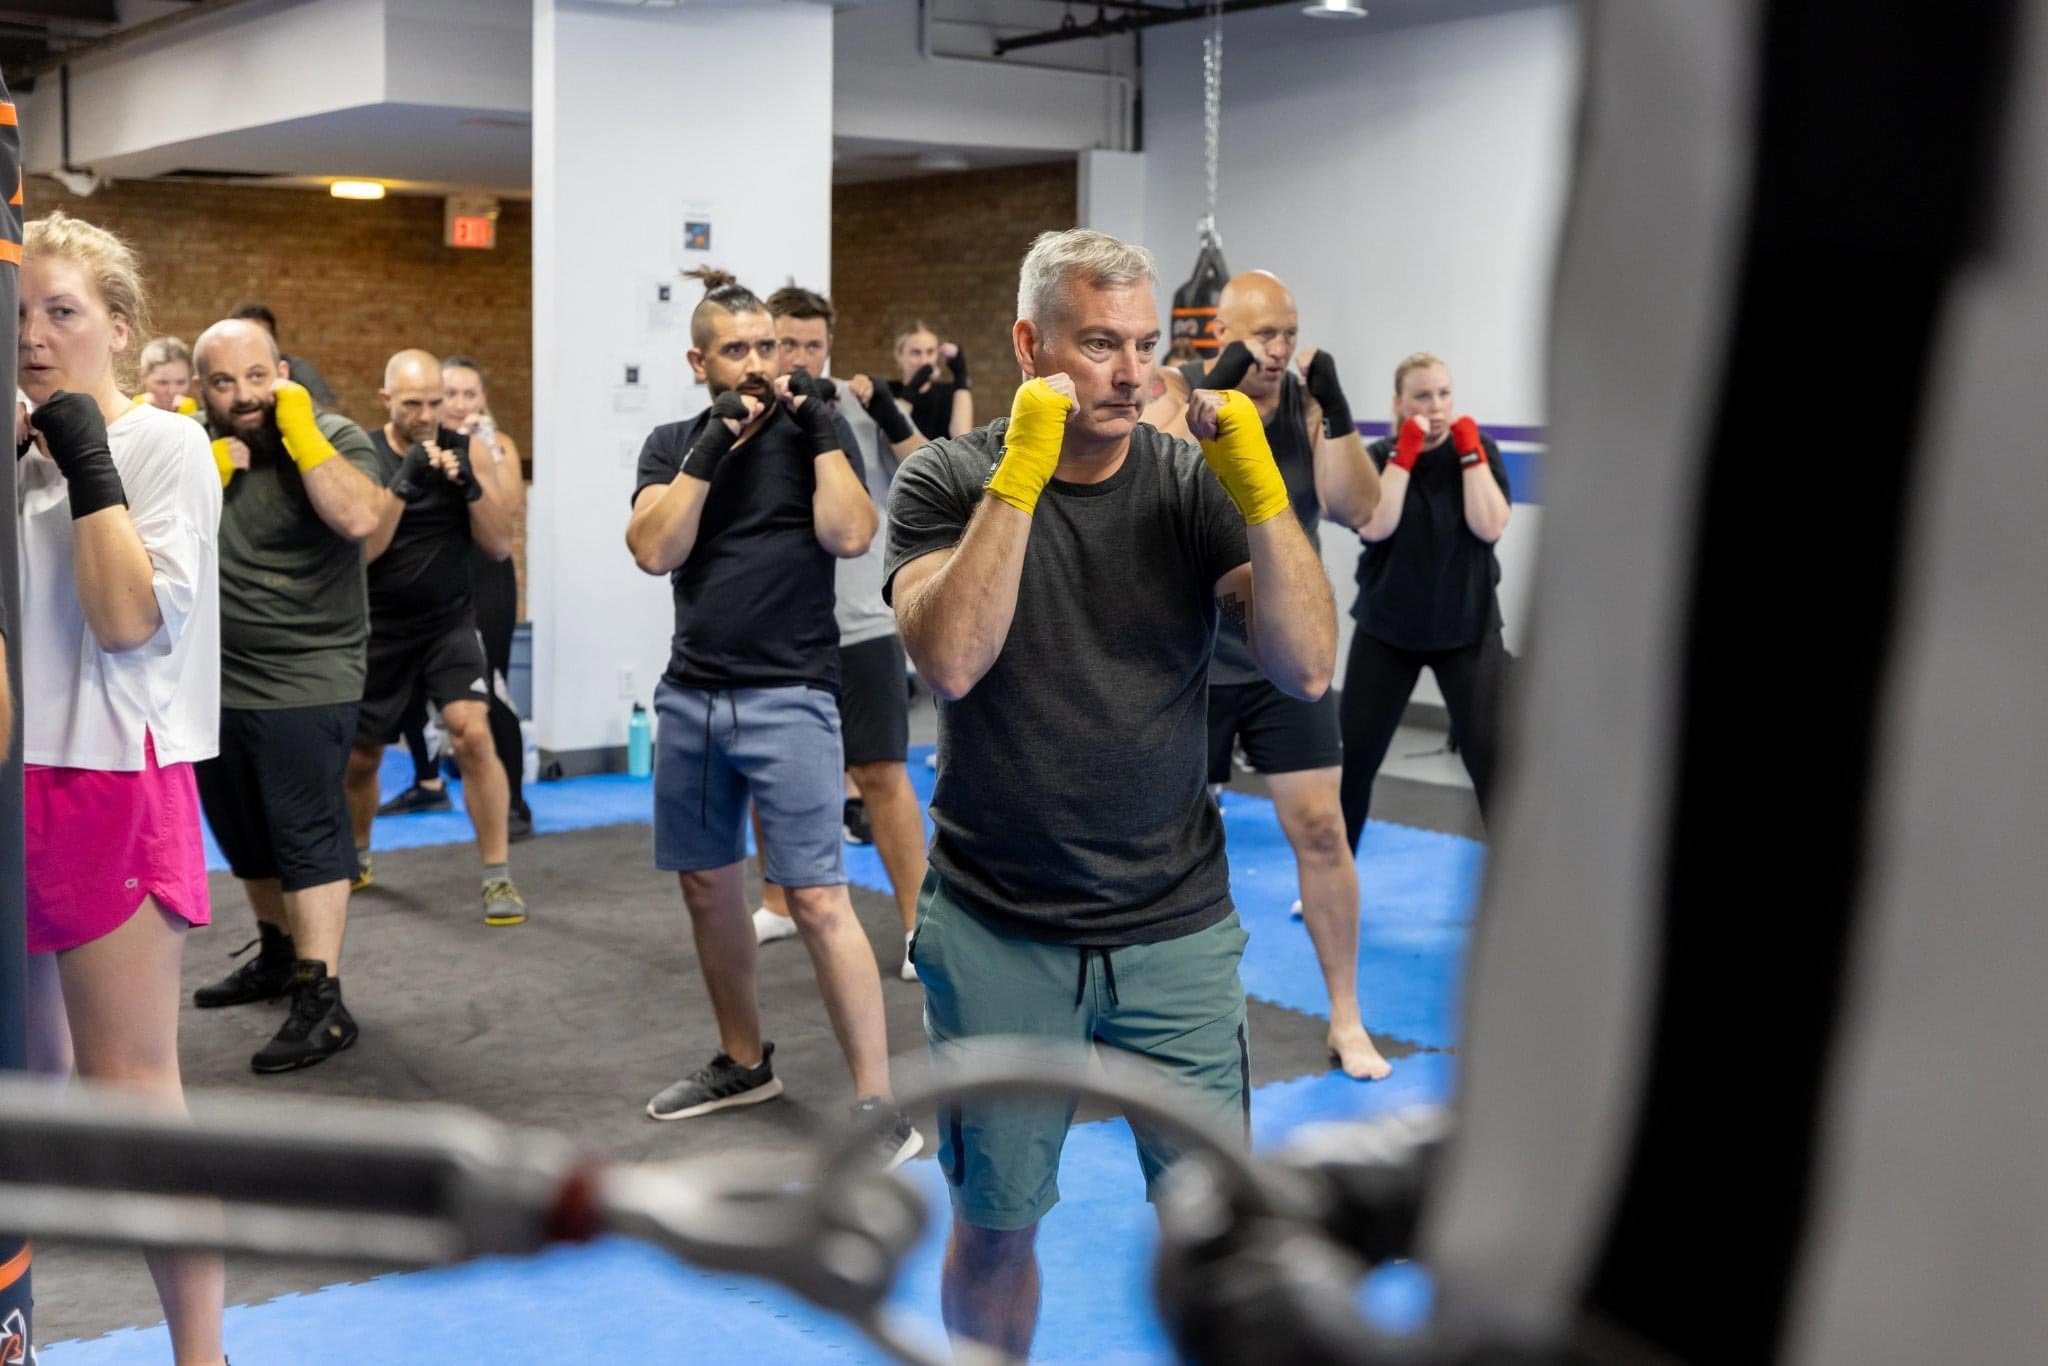 london-fight-to-end-boxing-event-training.jpg